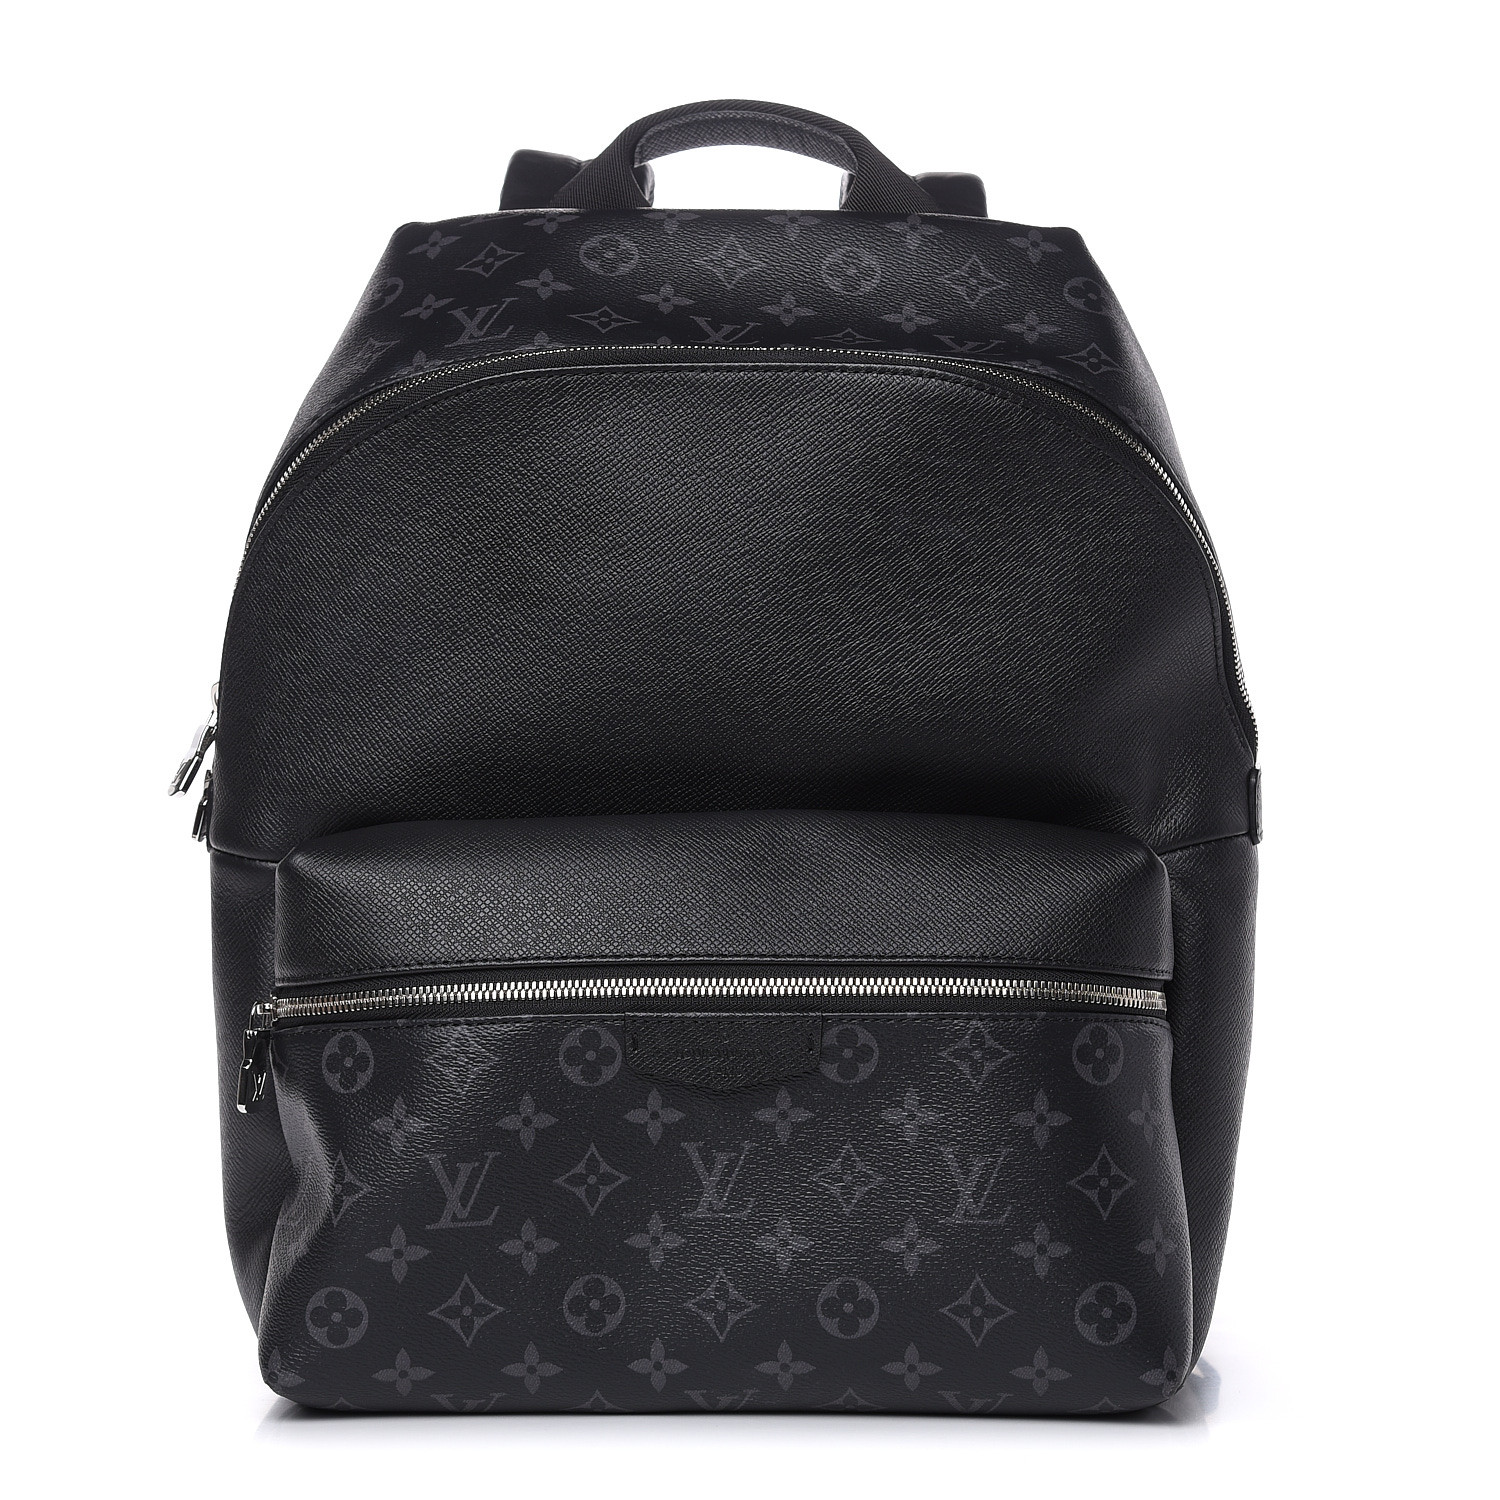 LOUIS VUITTON Monogram Eclipse Taiga Discovery Backpack PM 486112